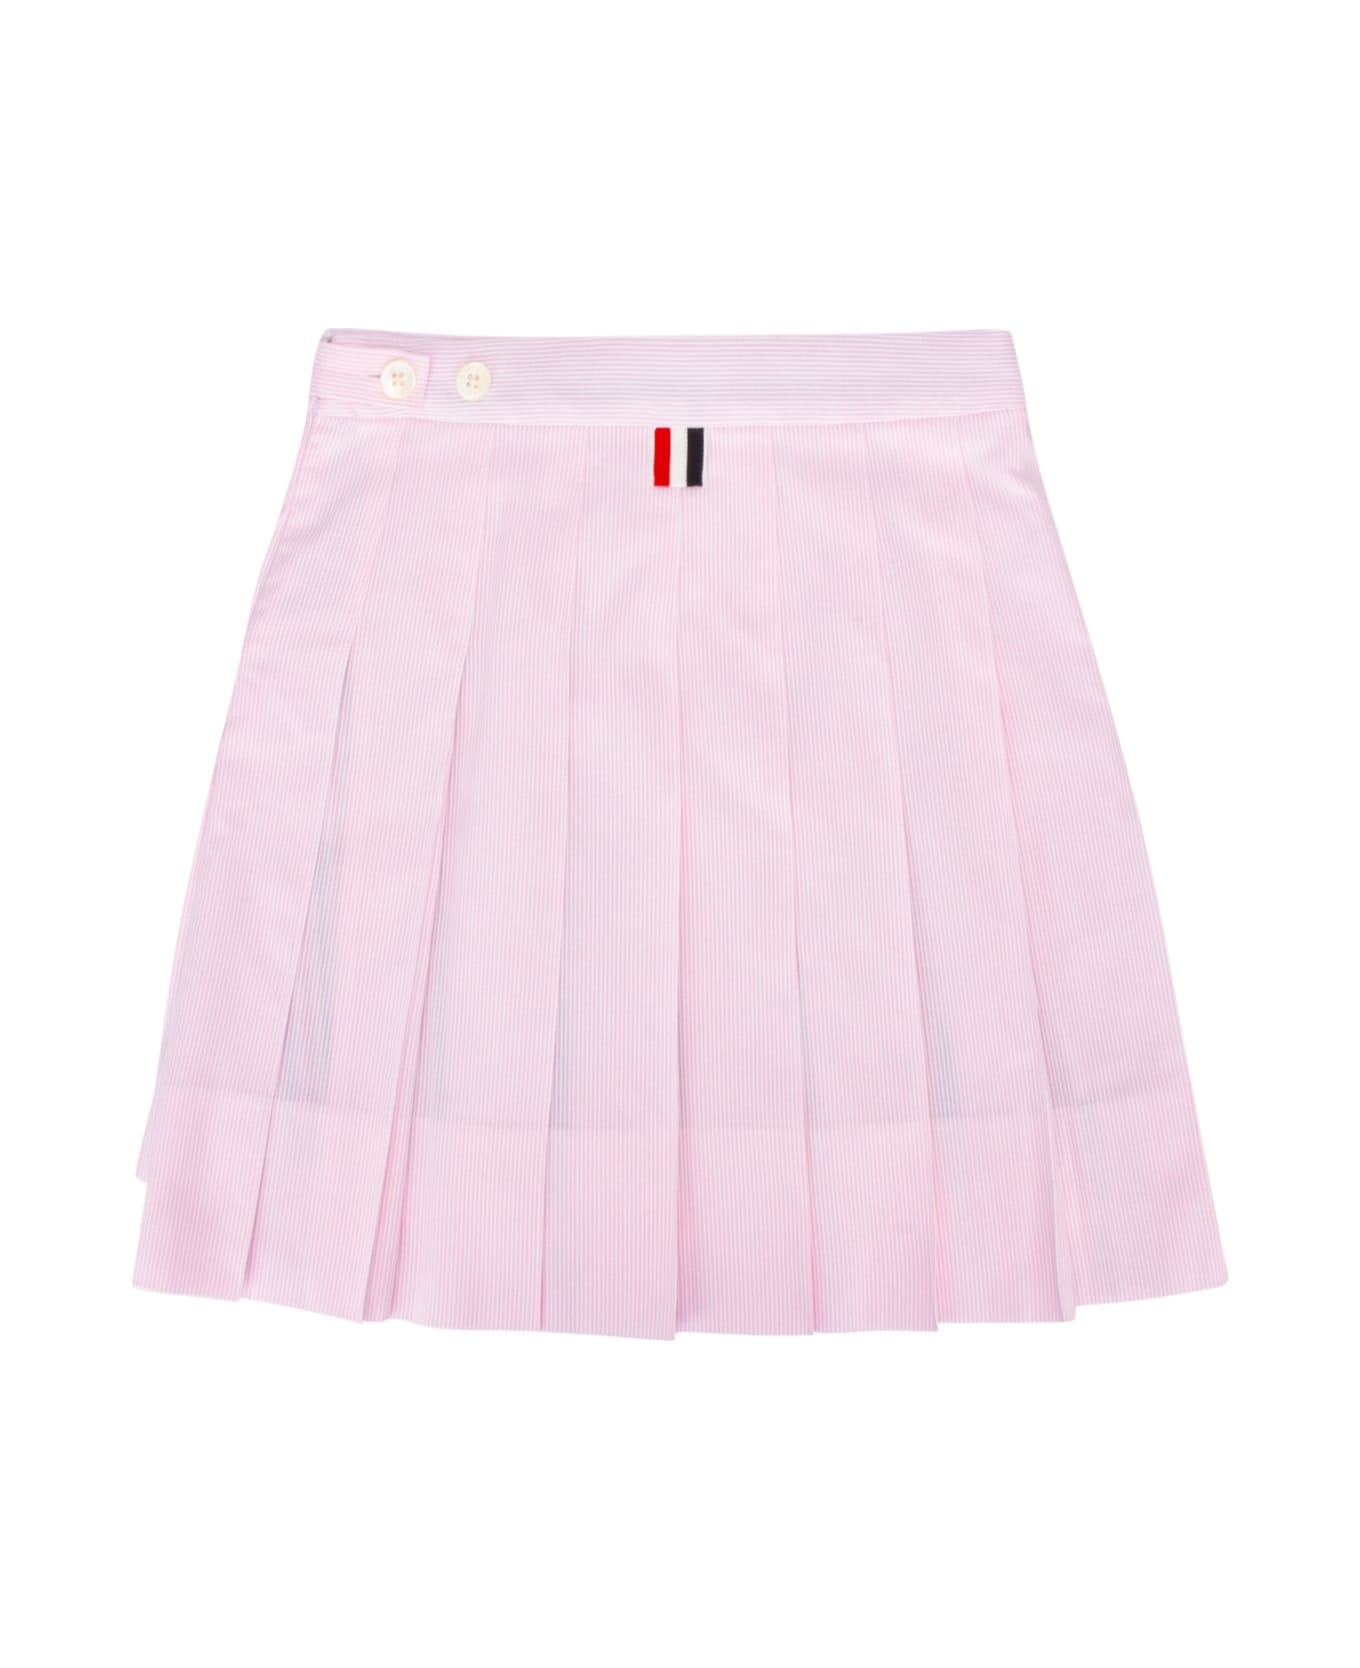 Thom Browne Gonna - LTPINK ボトムス